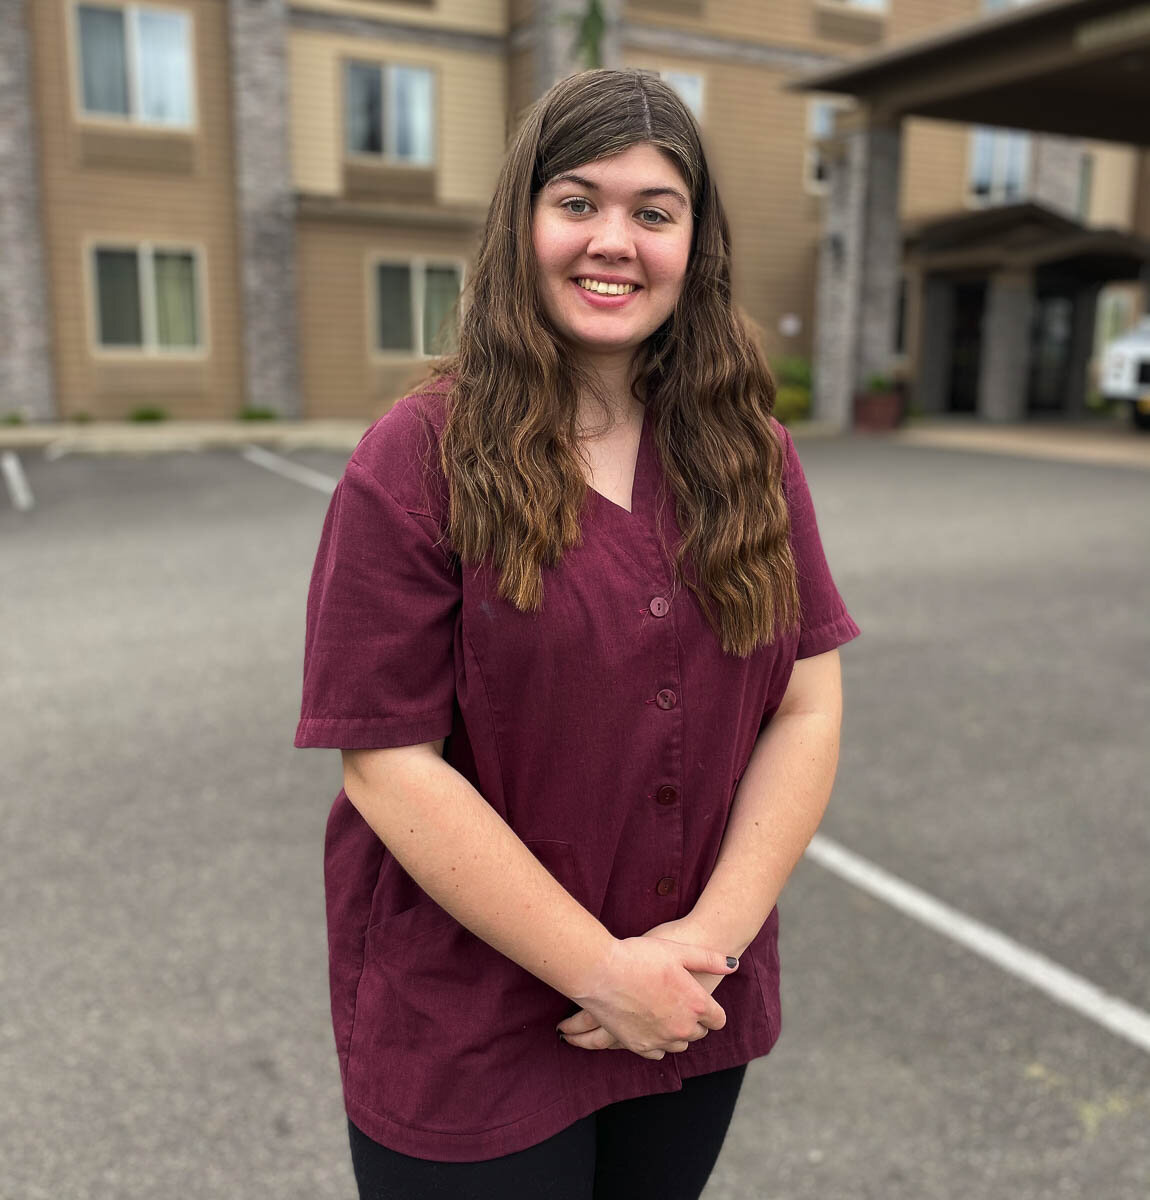 Shelbi Langston, participant in the Washougal School District Adult Transition program, works in the local Best Western laundry. Photo courtesy of Washougal School District